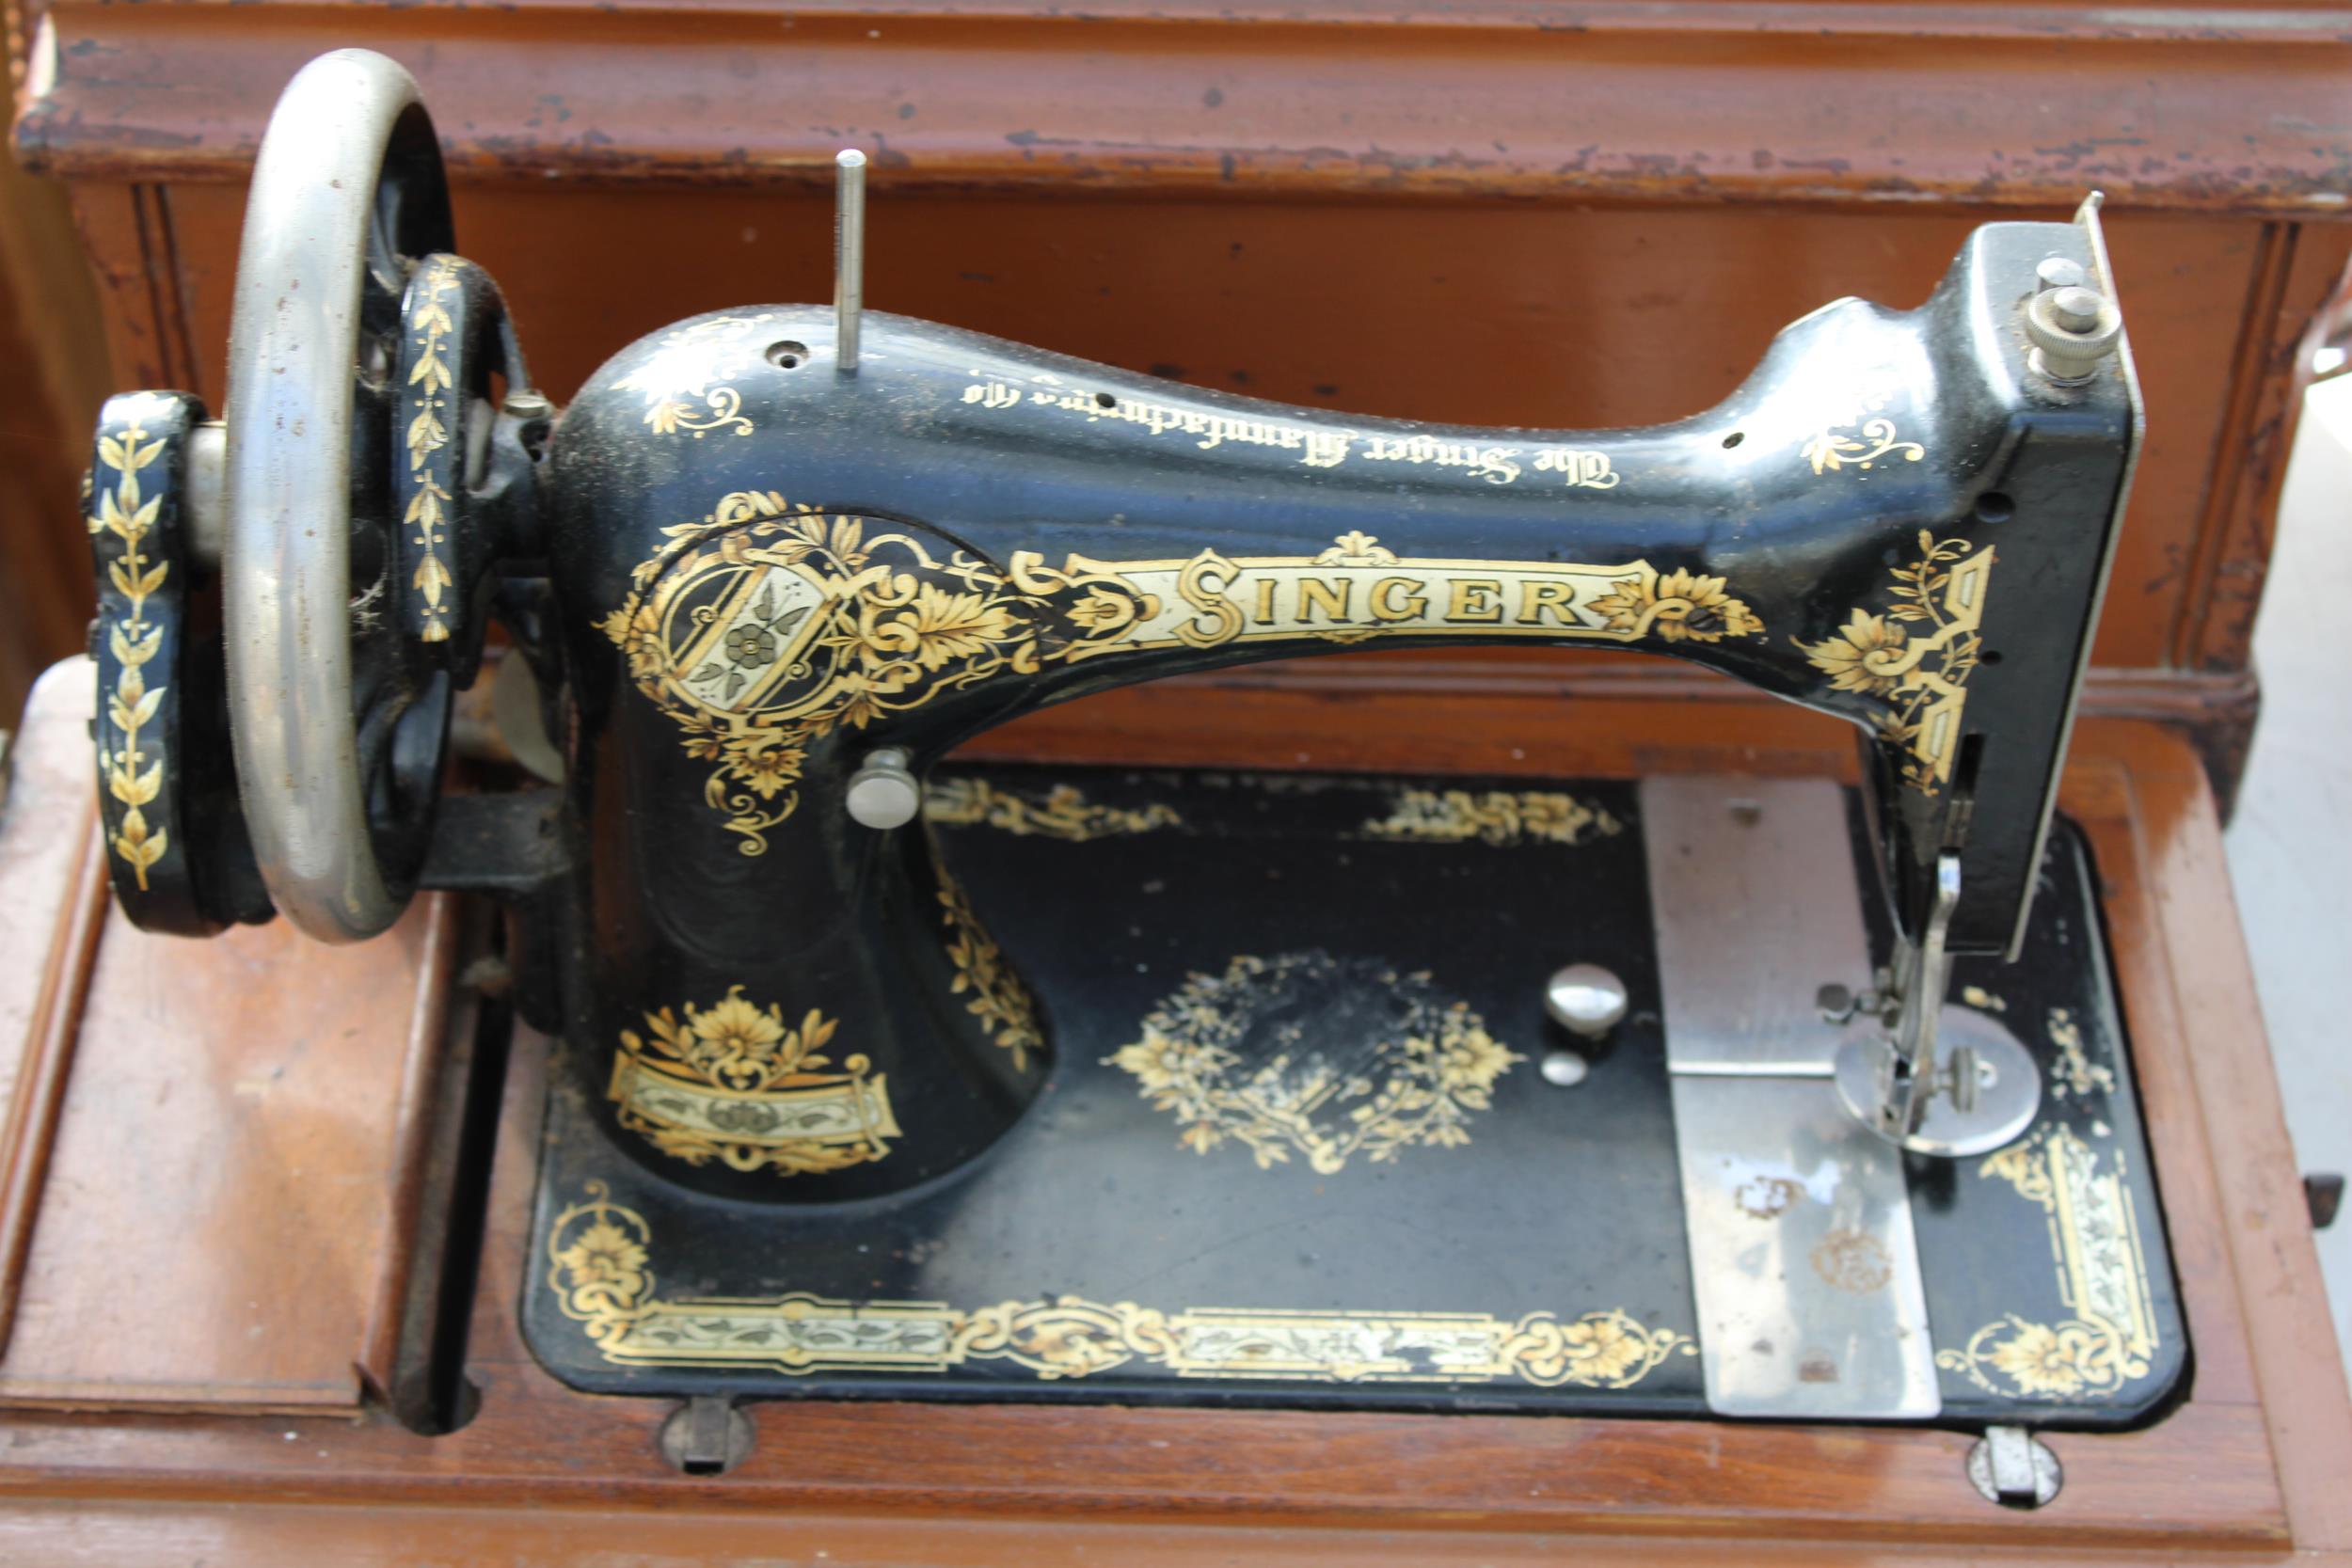 A VINTAGE SINGER SEWING MACHINE WITH CARRY CASE - Image 2 of 3